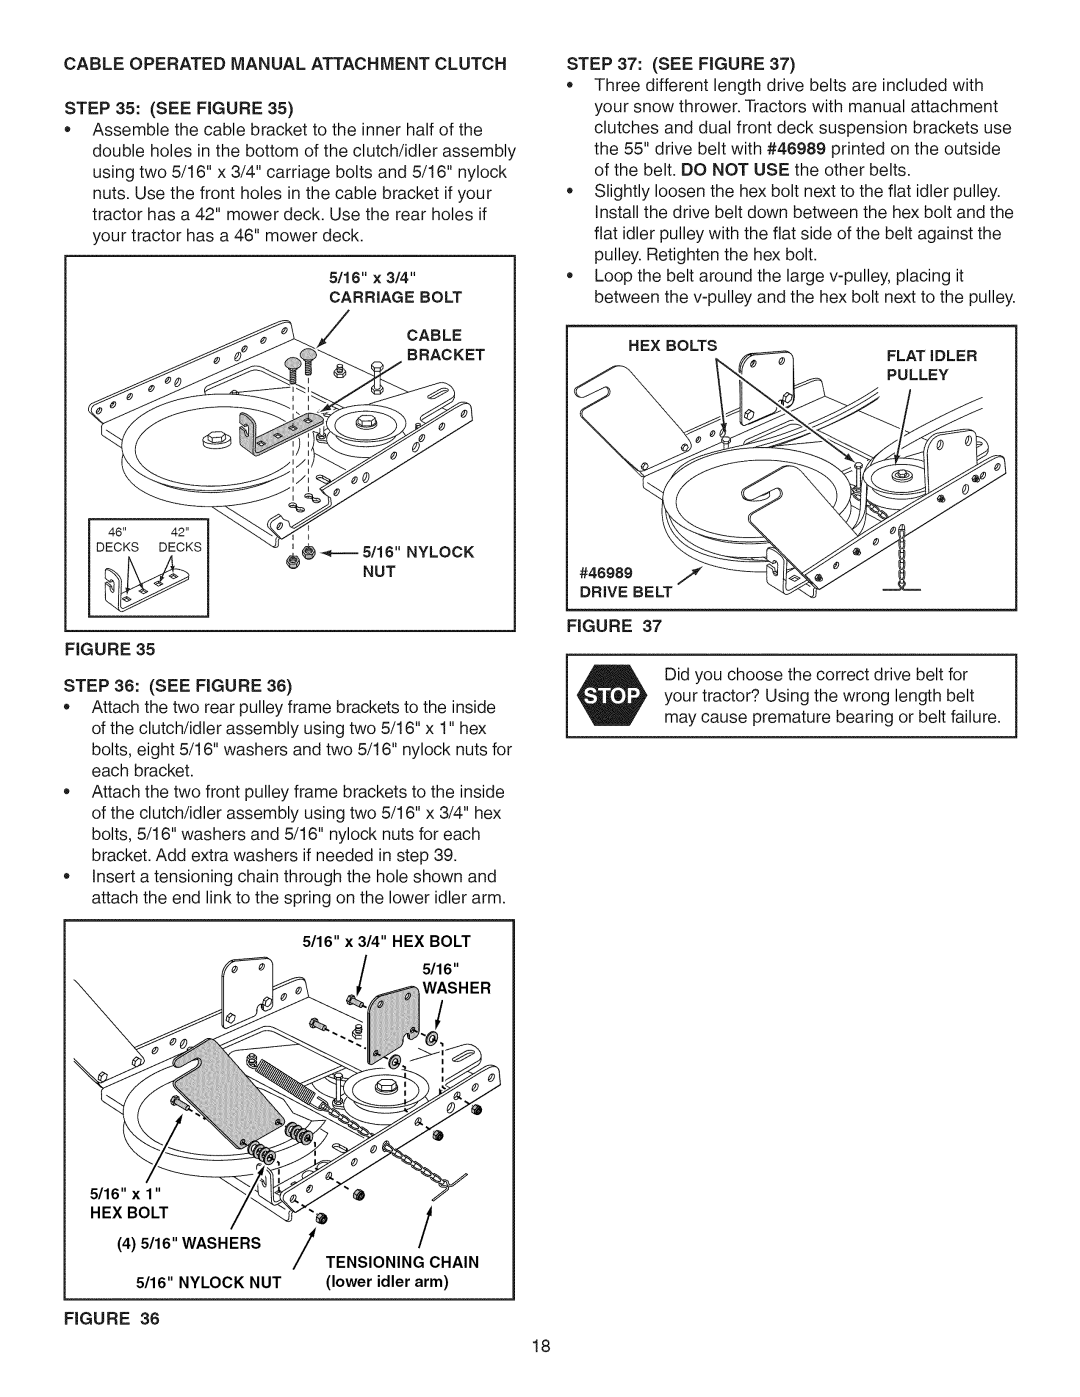 Craftsman 486.24837 Cableoperatedmanual Attachment Clutch, See Figure, 5/16 x 3/4 HEX BOLT, Hex Bolt, Tensioning Chain 